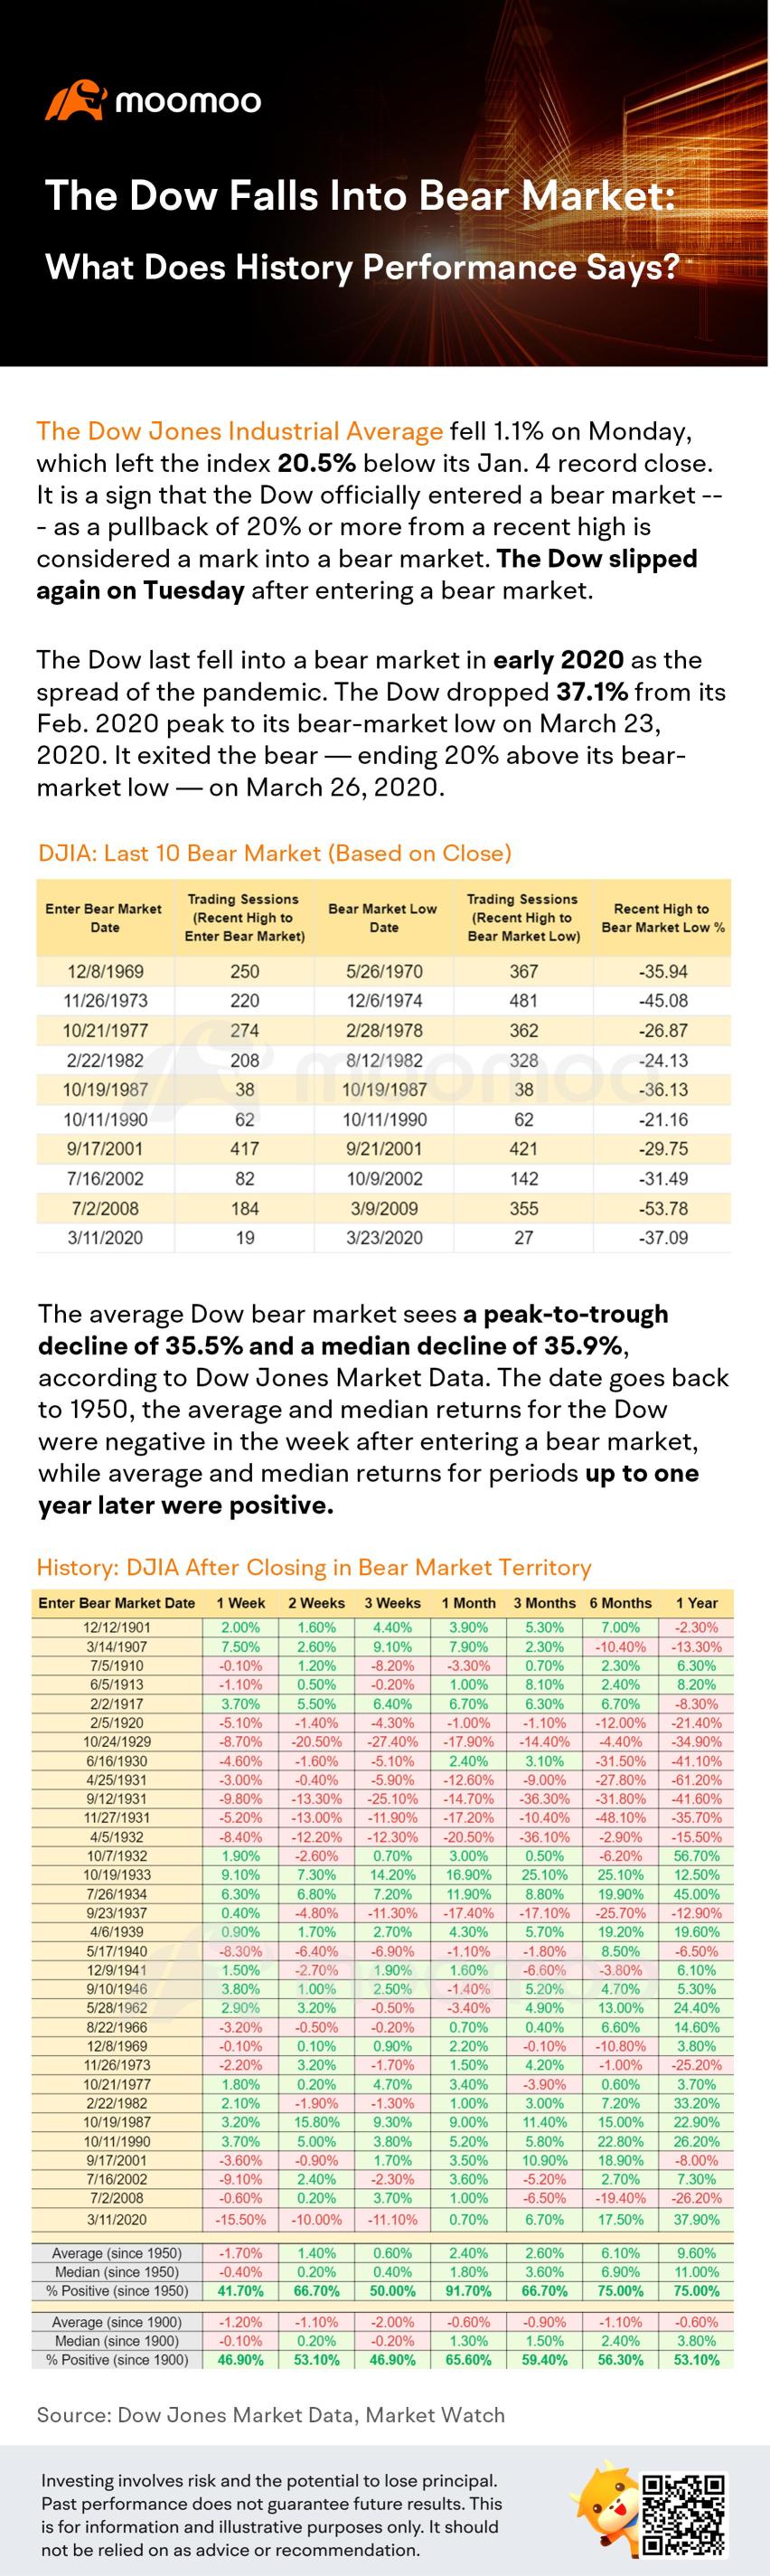 The Dow Falls Into Bear Market: What Does History Performance Says?